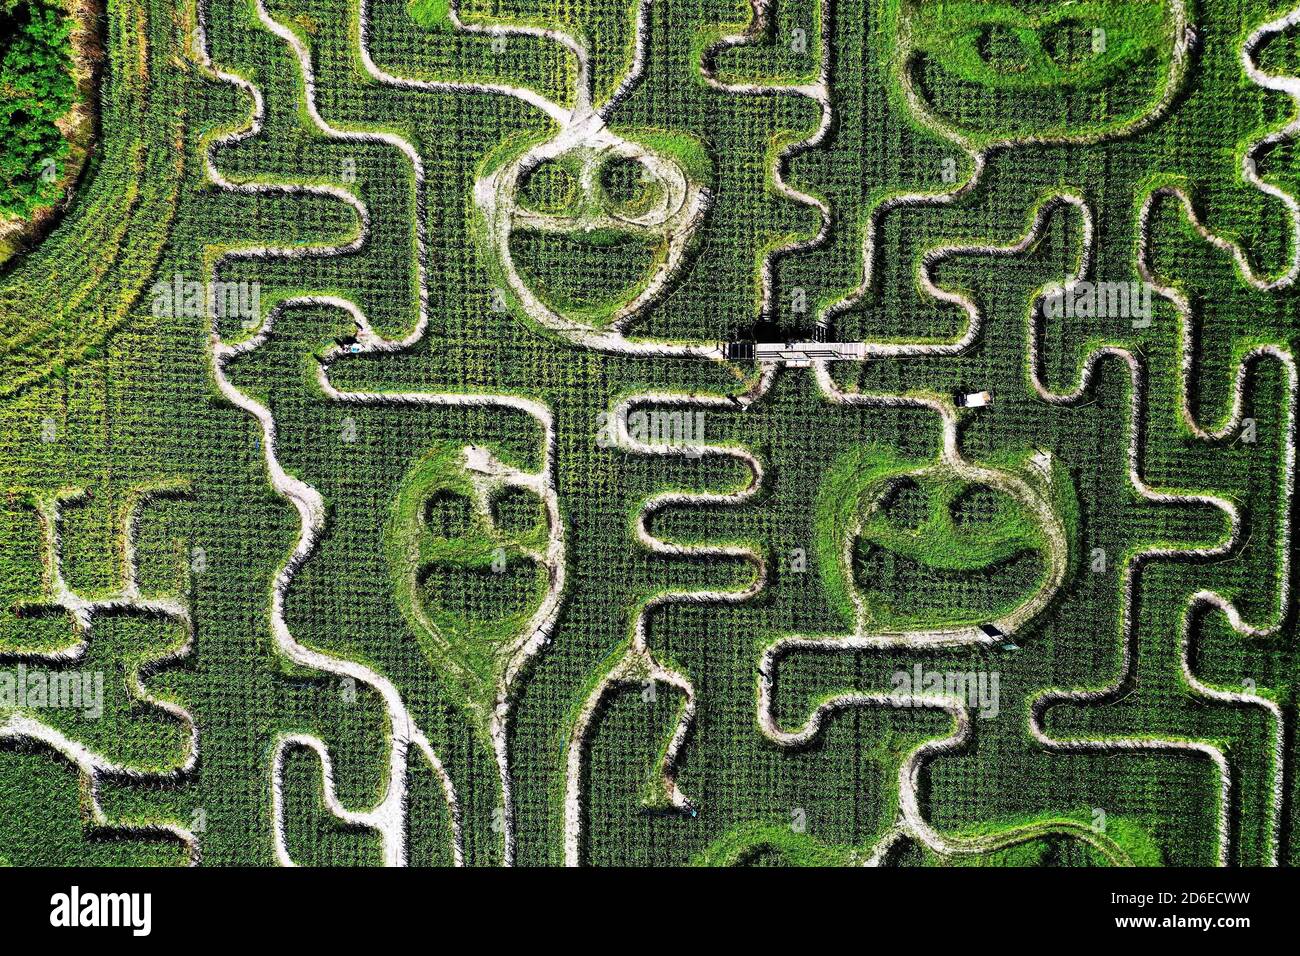 Mt. Dora, United States. 15th Oct, 2020. October 15, 2020 - Mt. Dora, Florida, United States - The annual fall corn maze is seen at Long and Scott Farms in this aerial view from a drone on October 15, 2020 in Mt. Dora, Florida. The theme for this yearÕs 6-acre maze, which is open with social distancing during the coronavirus pandemic, is 'Farm to Table.' Credit: Paul Hennessy/Alamy Live News Stock Photo